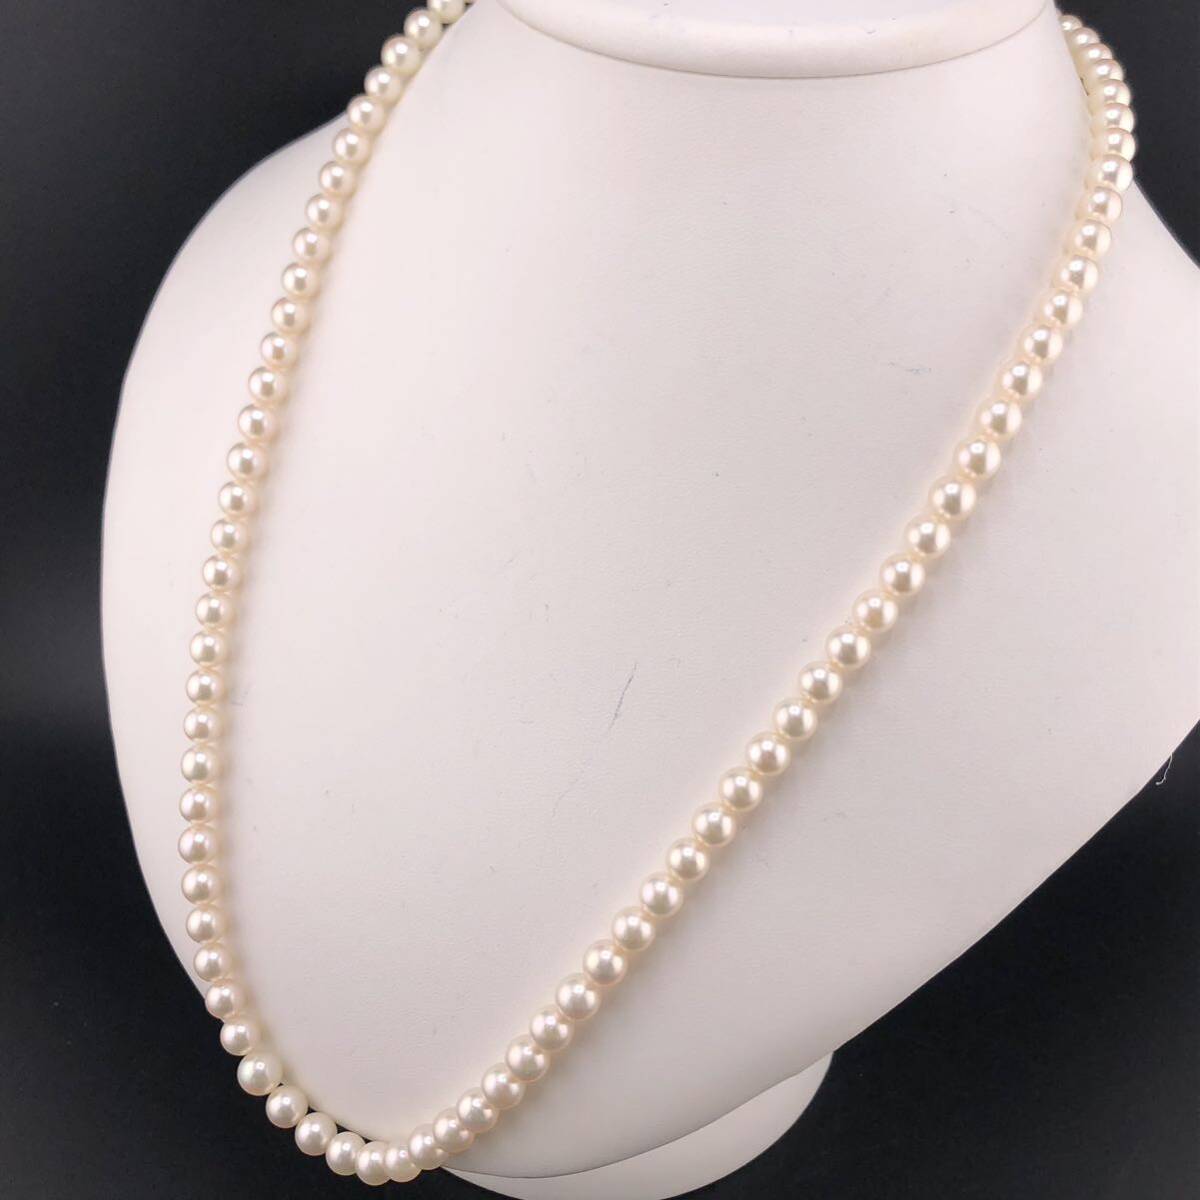 P04-0019 アコヤパールネックレス 6.5mm~7.0mm 59cm 39.6g ( アコヤ真珠 Pearl necklace SILVER )の画像3